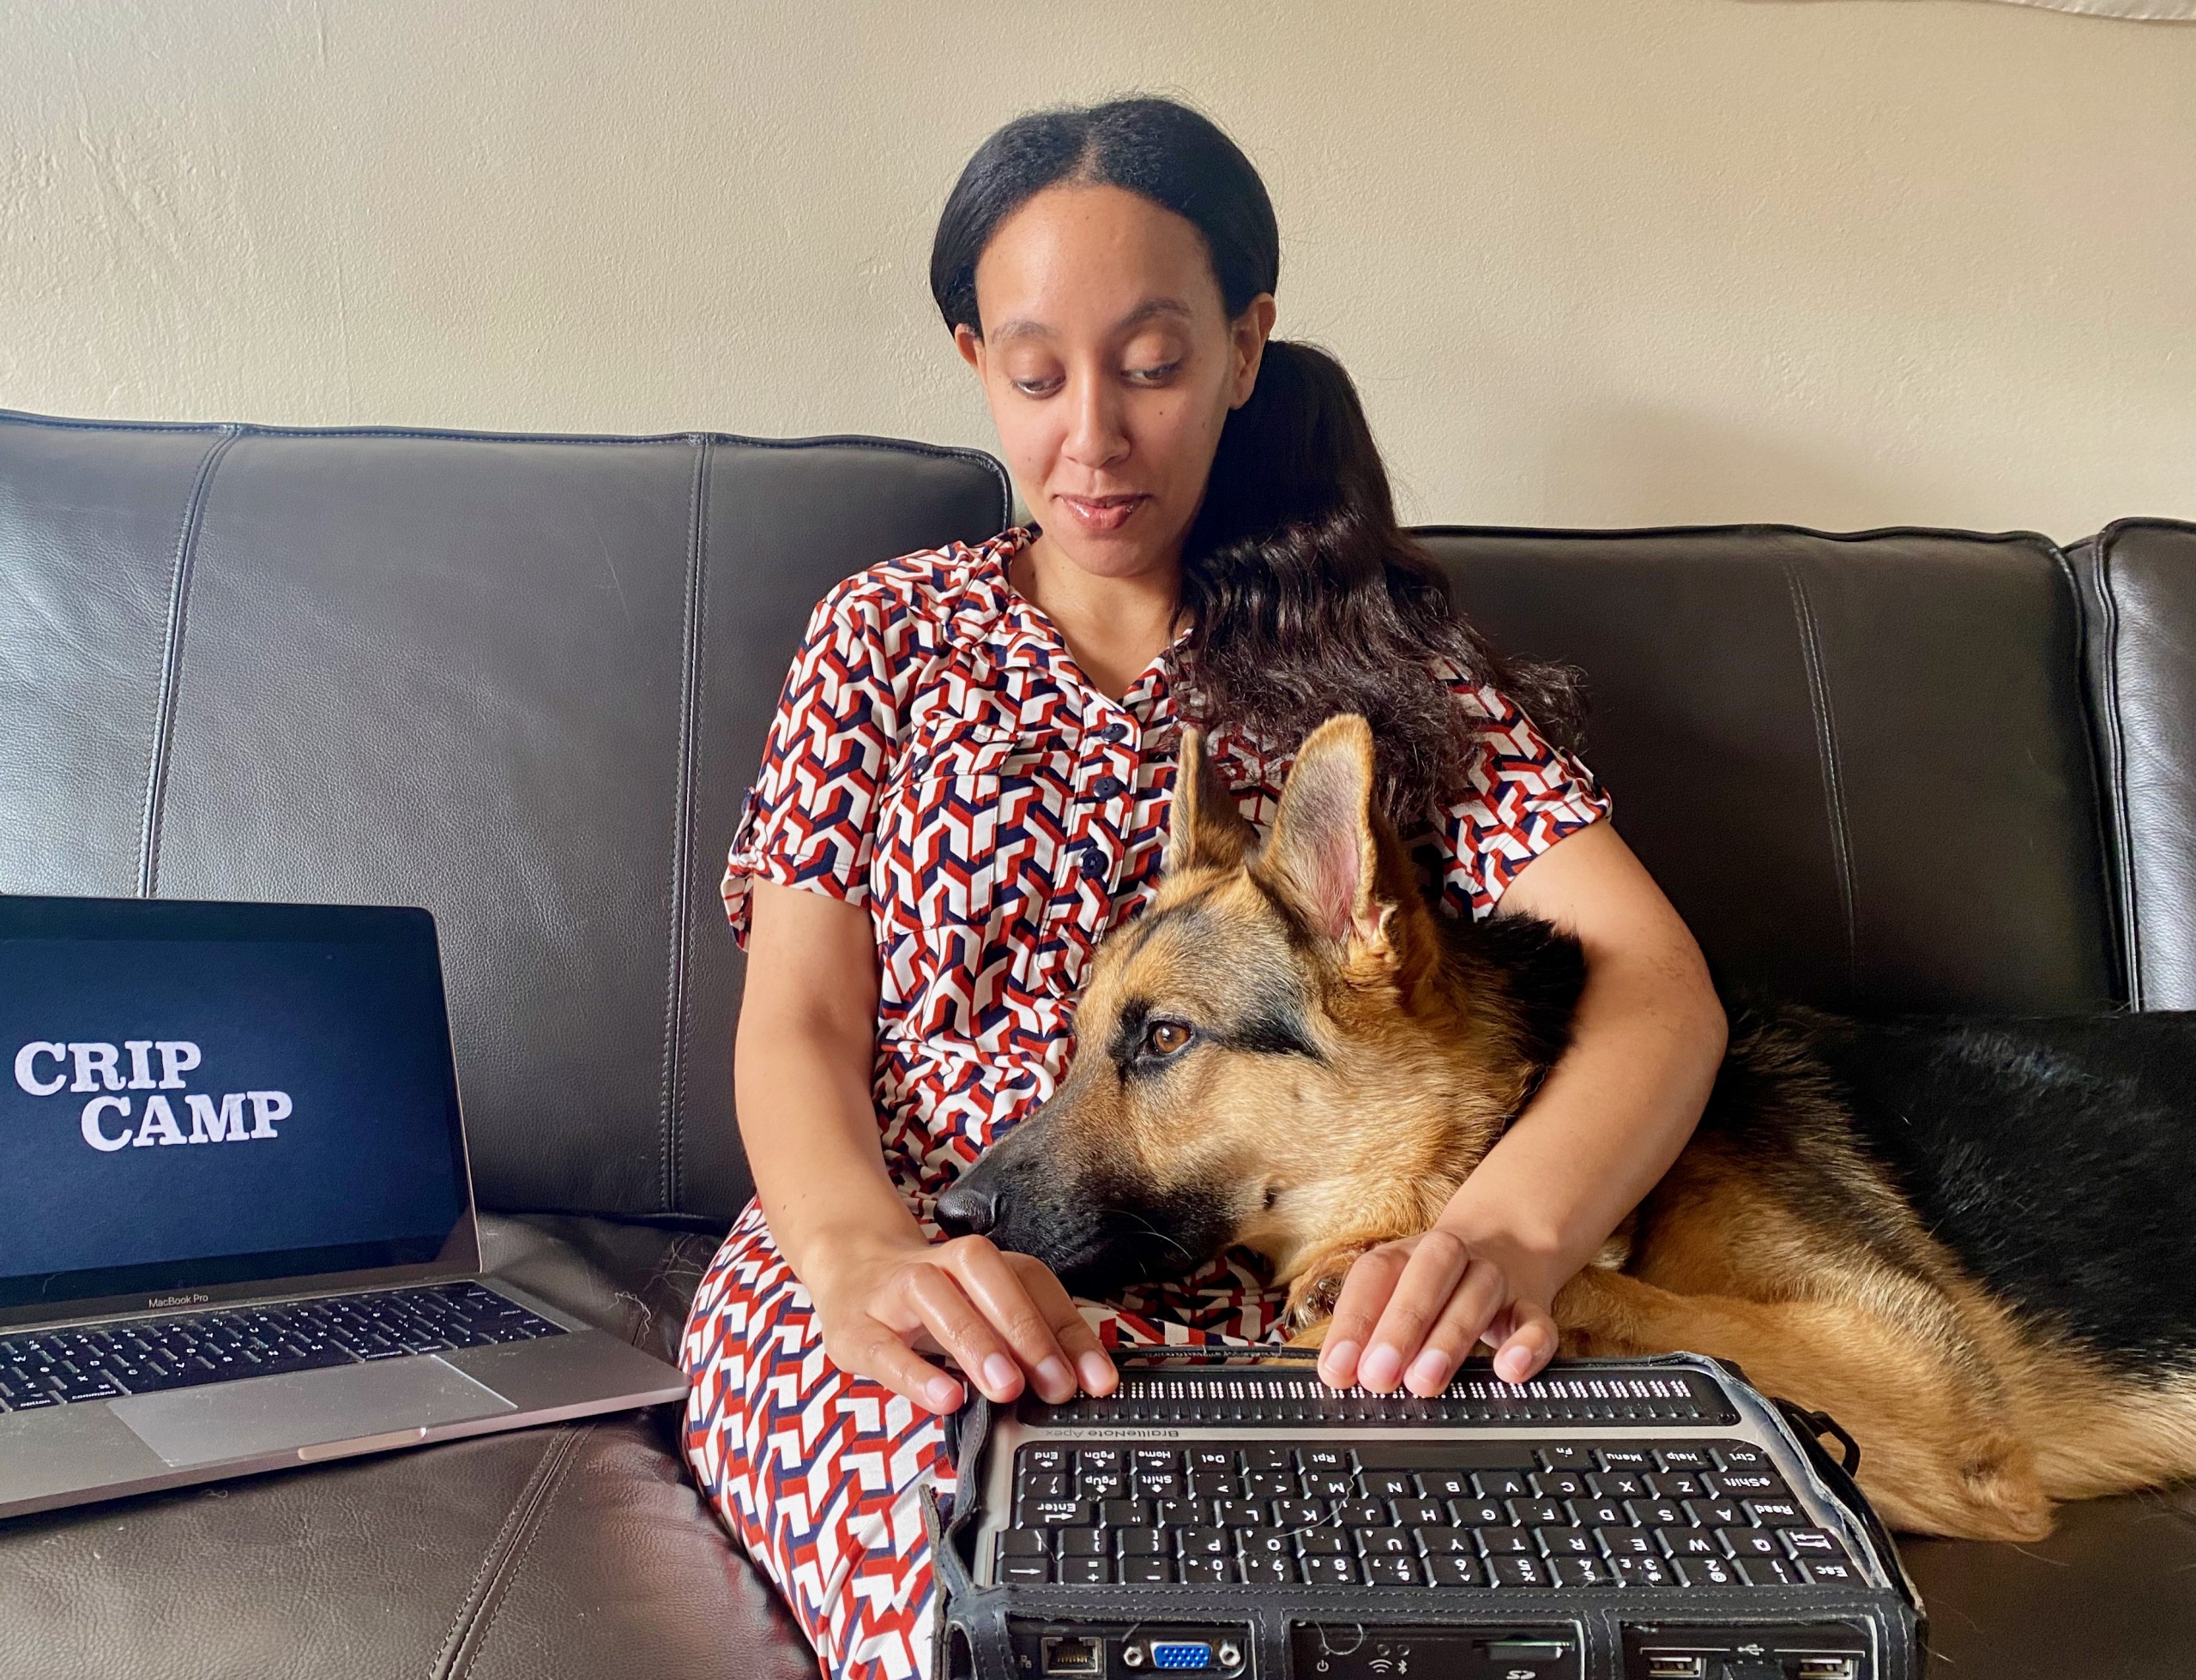 Haben is sitting on a sofa beside a laptop showing Crip Camp. Her braille computer is on her lap, as well as the head of Mister Mylo the German Shepherd who is attentively watching the screen